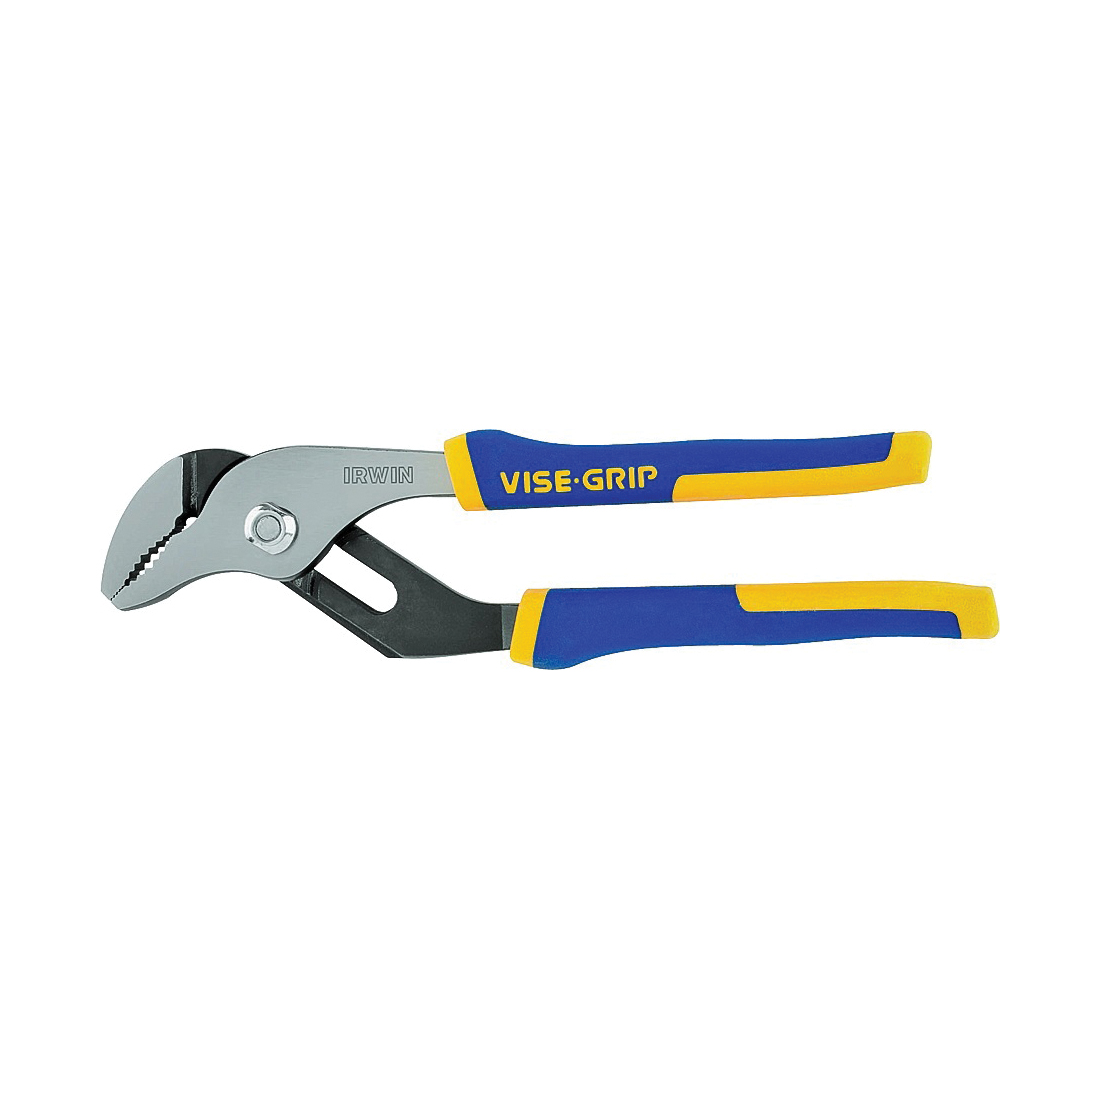 2078506 Groove Joint Plier, 6 in OAL, 1 in Jaw Opening, Blue/Yellow Handle, Cushion-Grip Handle